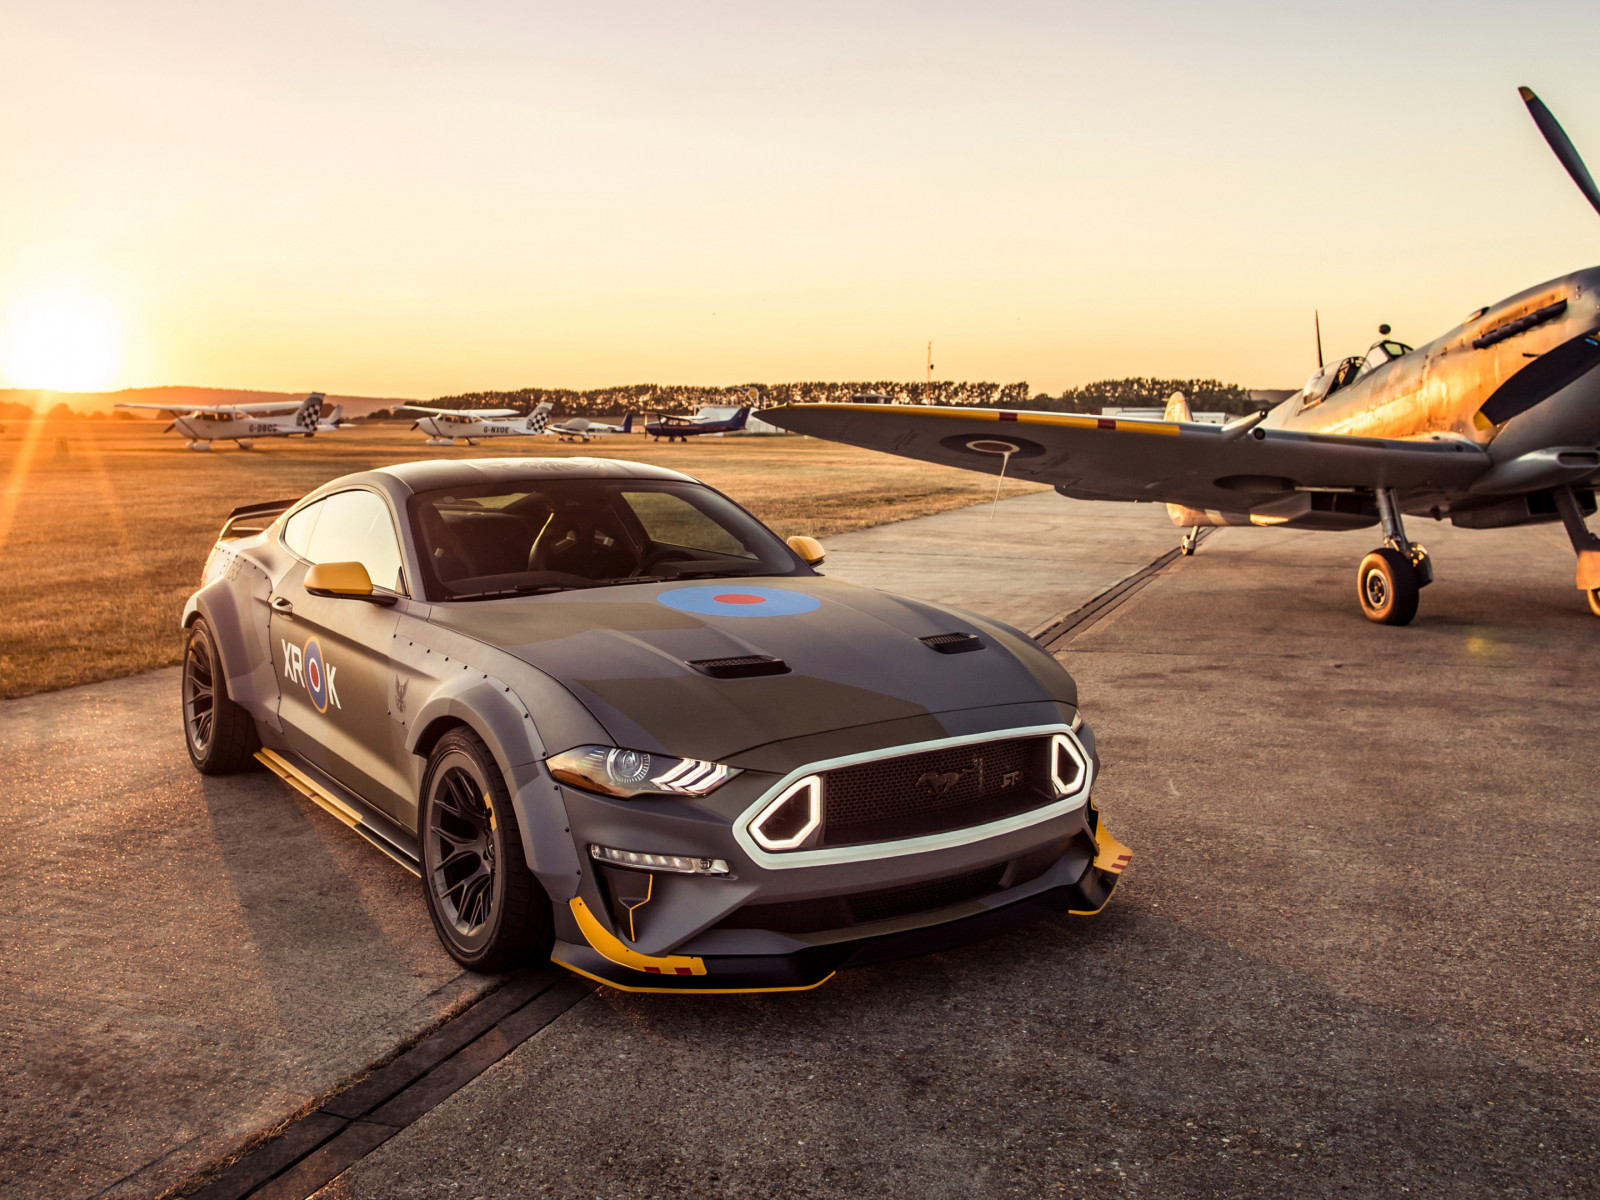 Ford Eagle Squadron Mustang GT wallpaper 1600x1200